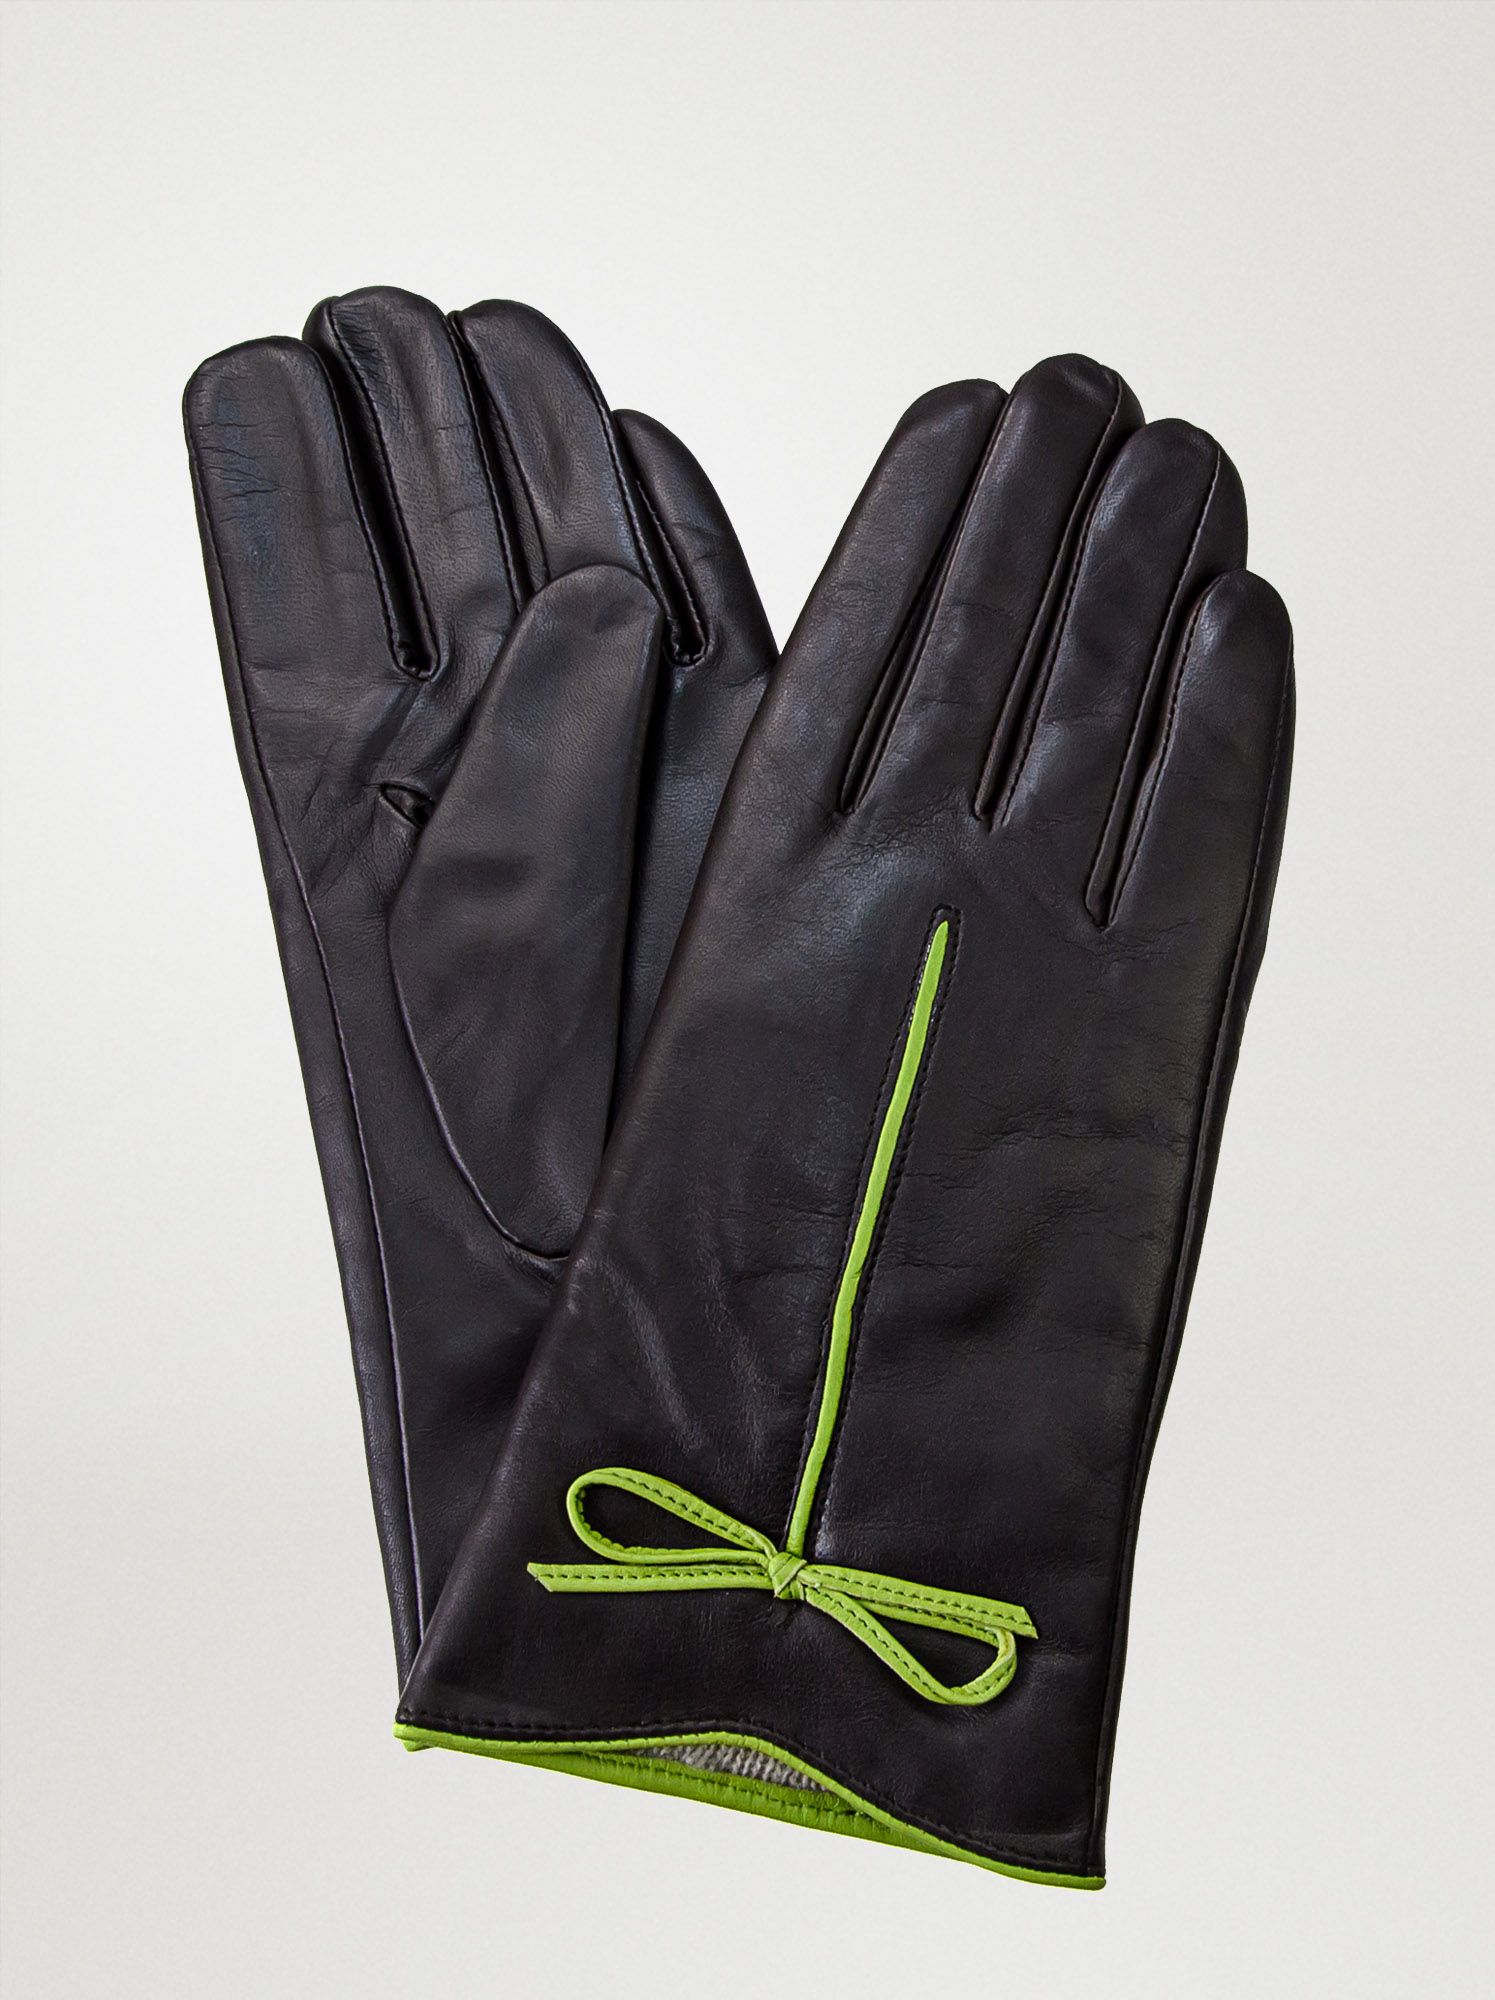 Leather gloves M image 1